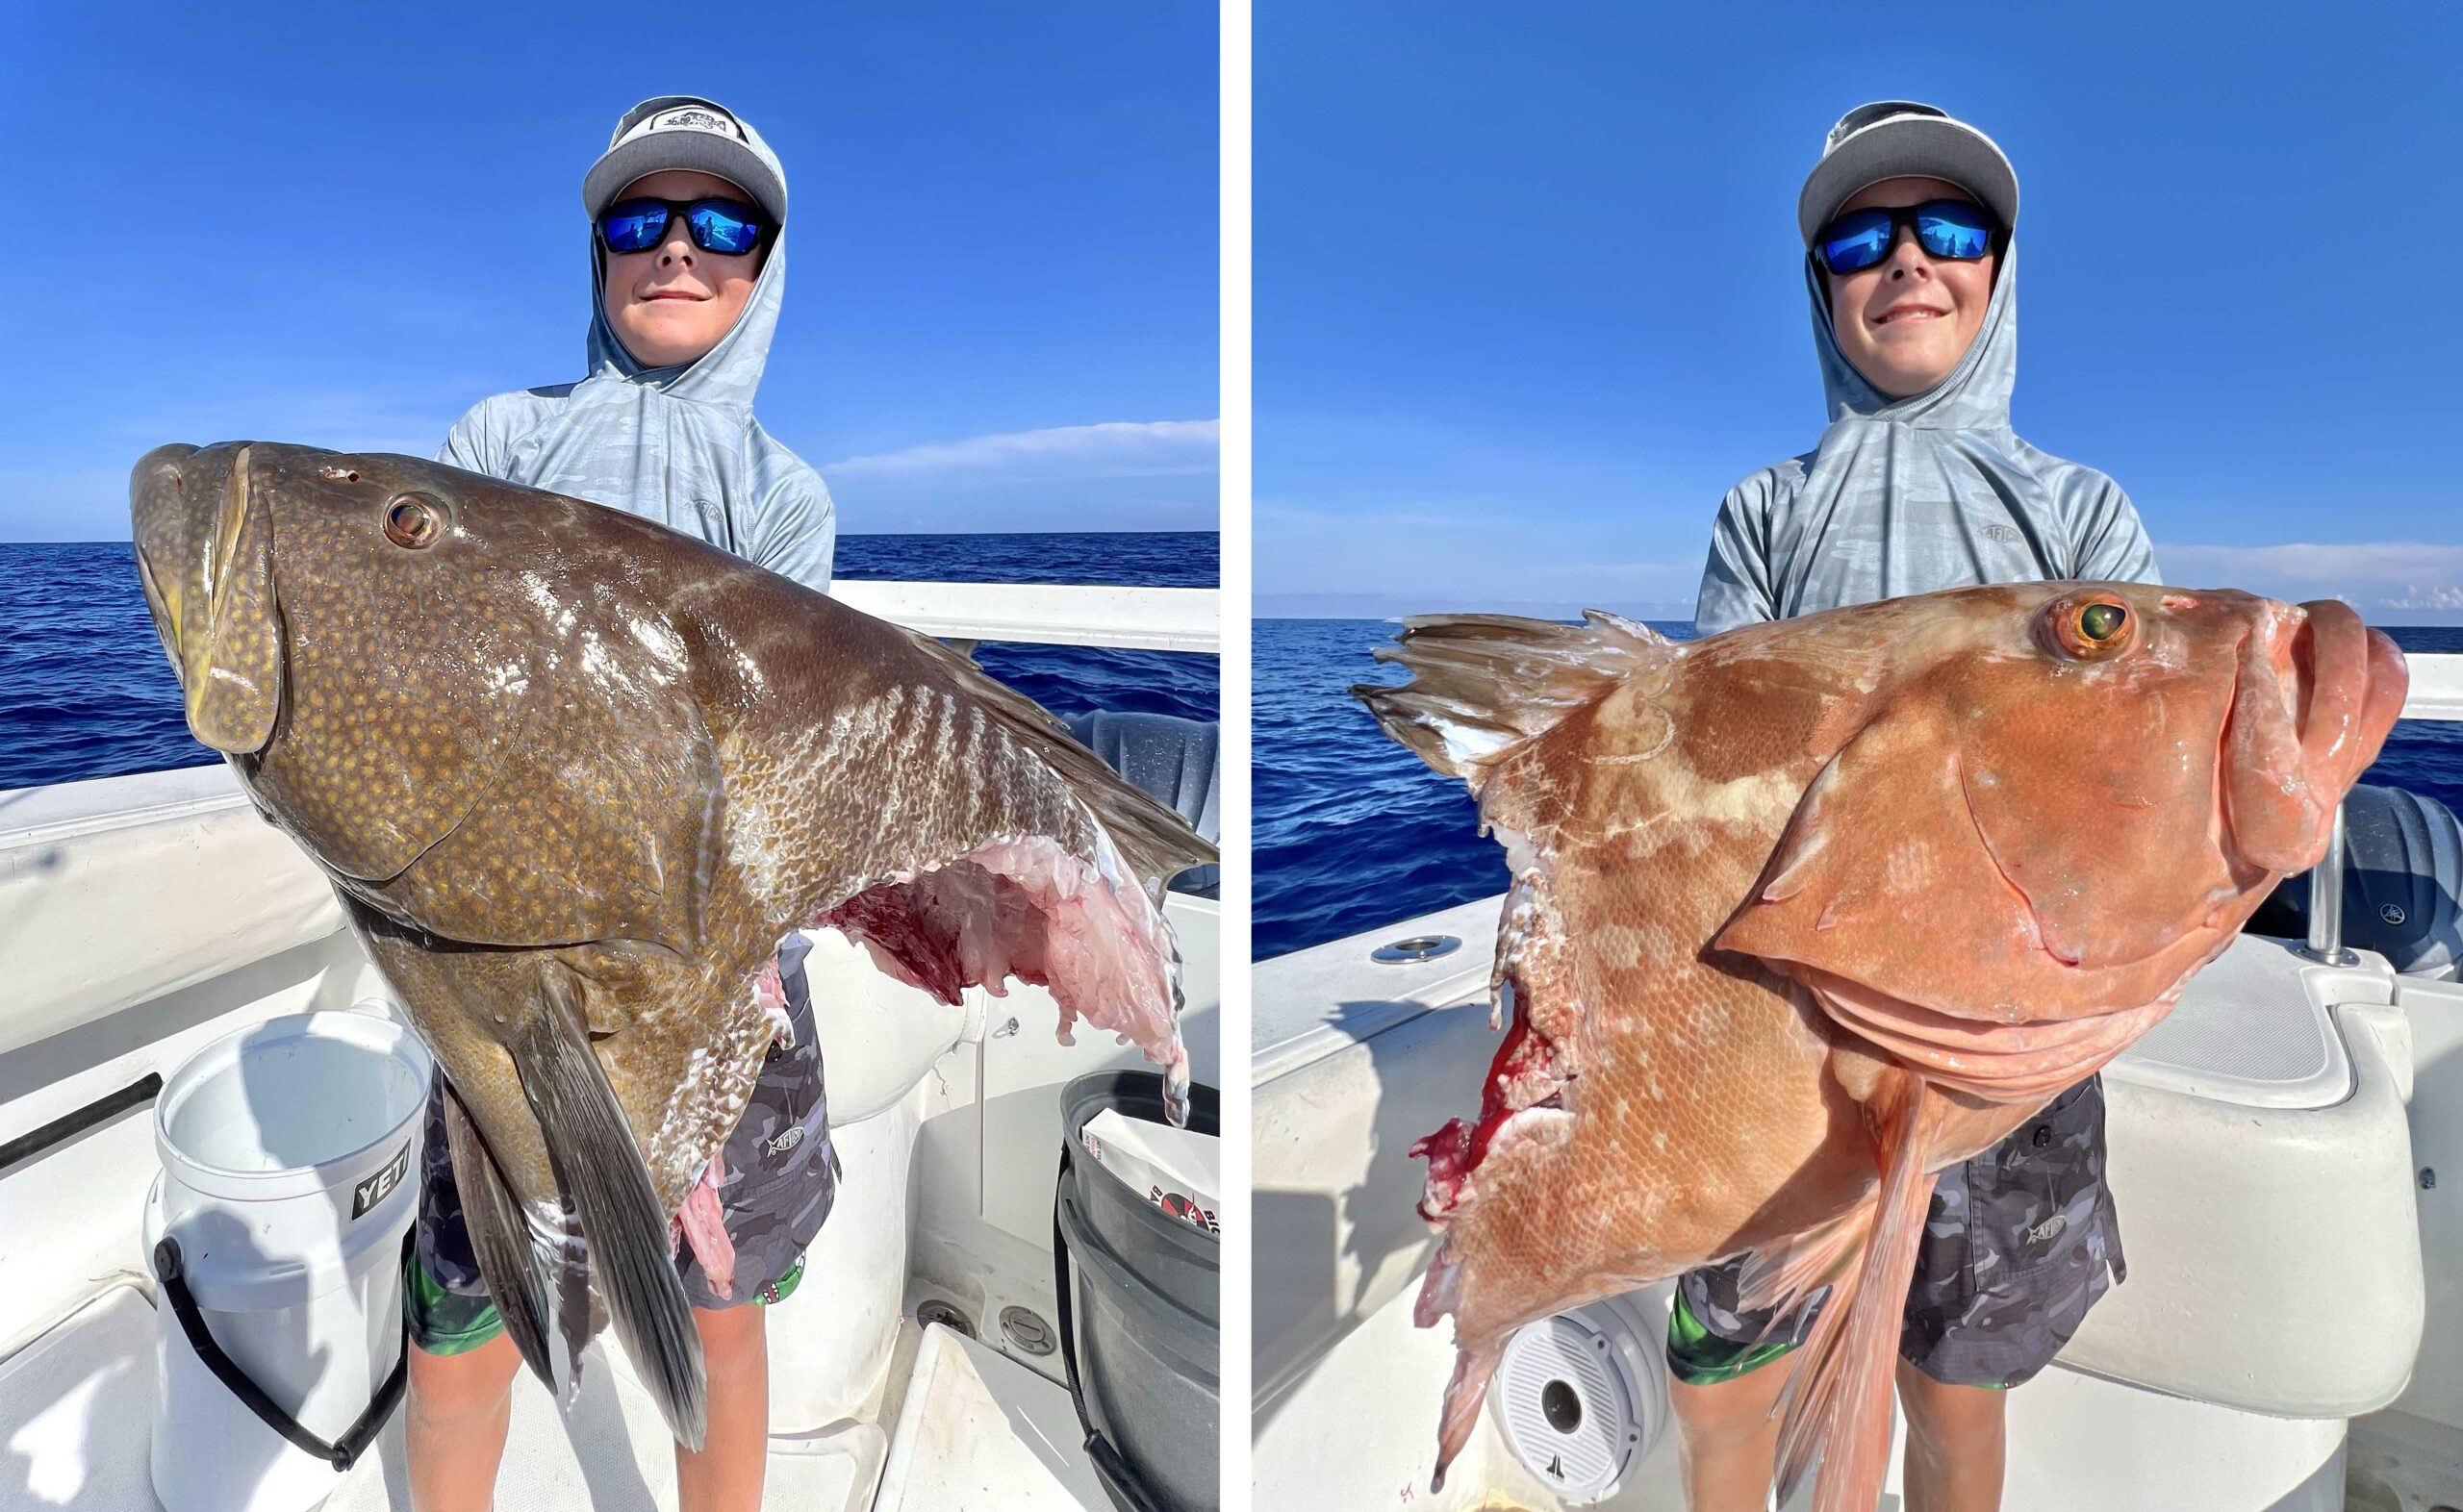 A kid holds up fish eaten by sharks.